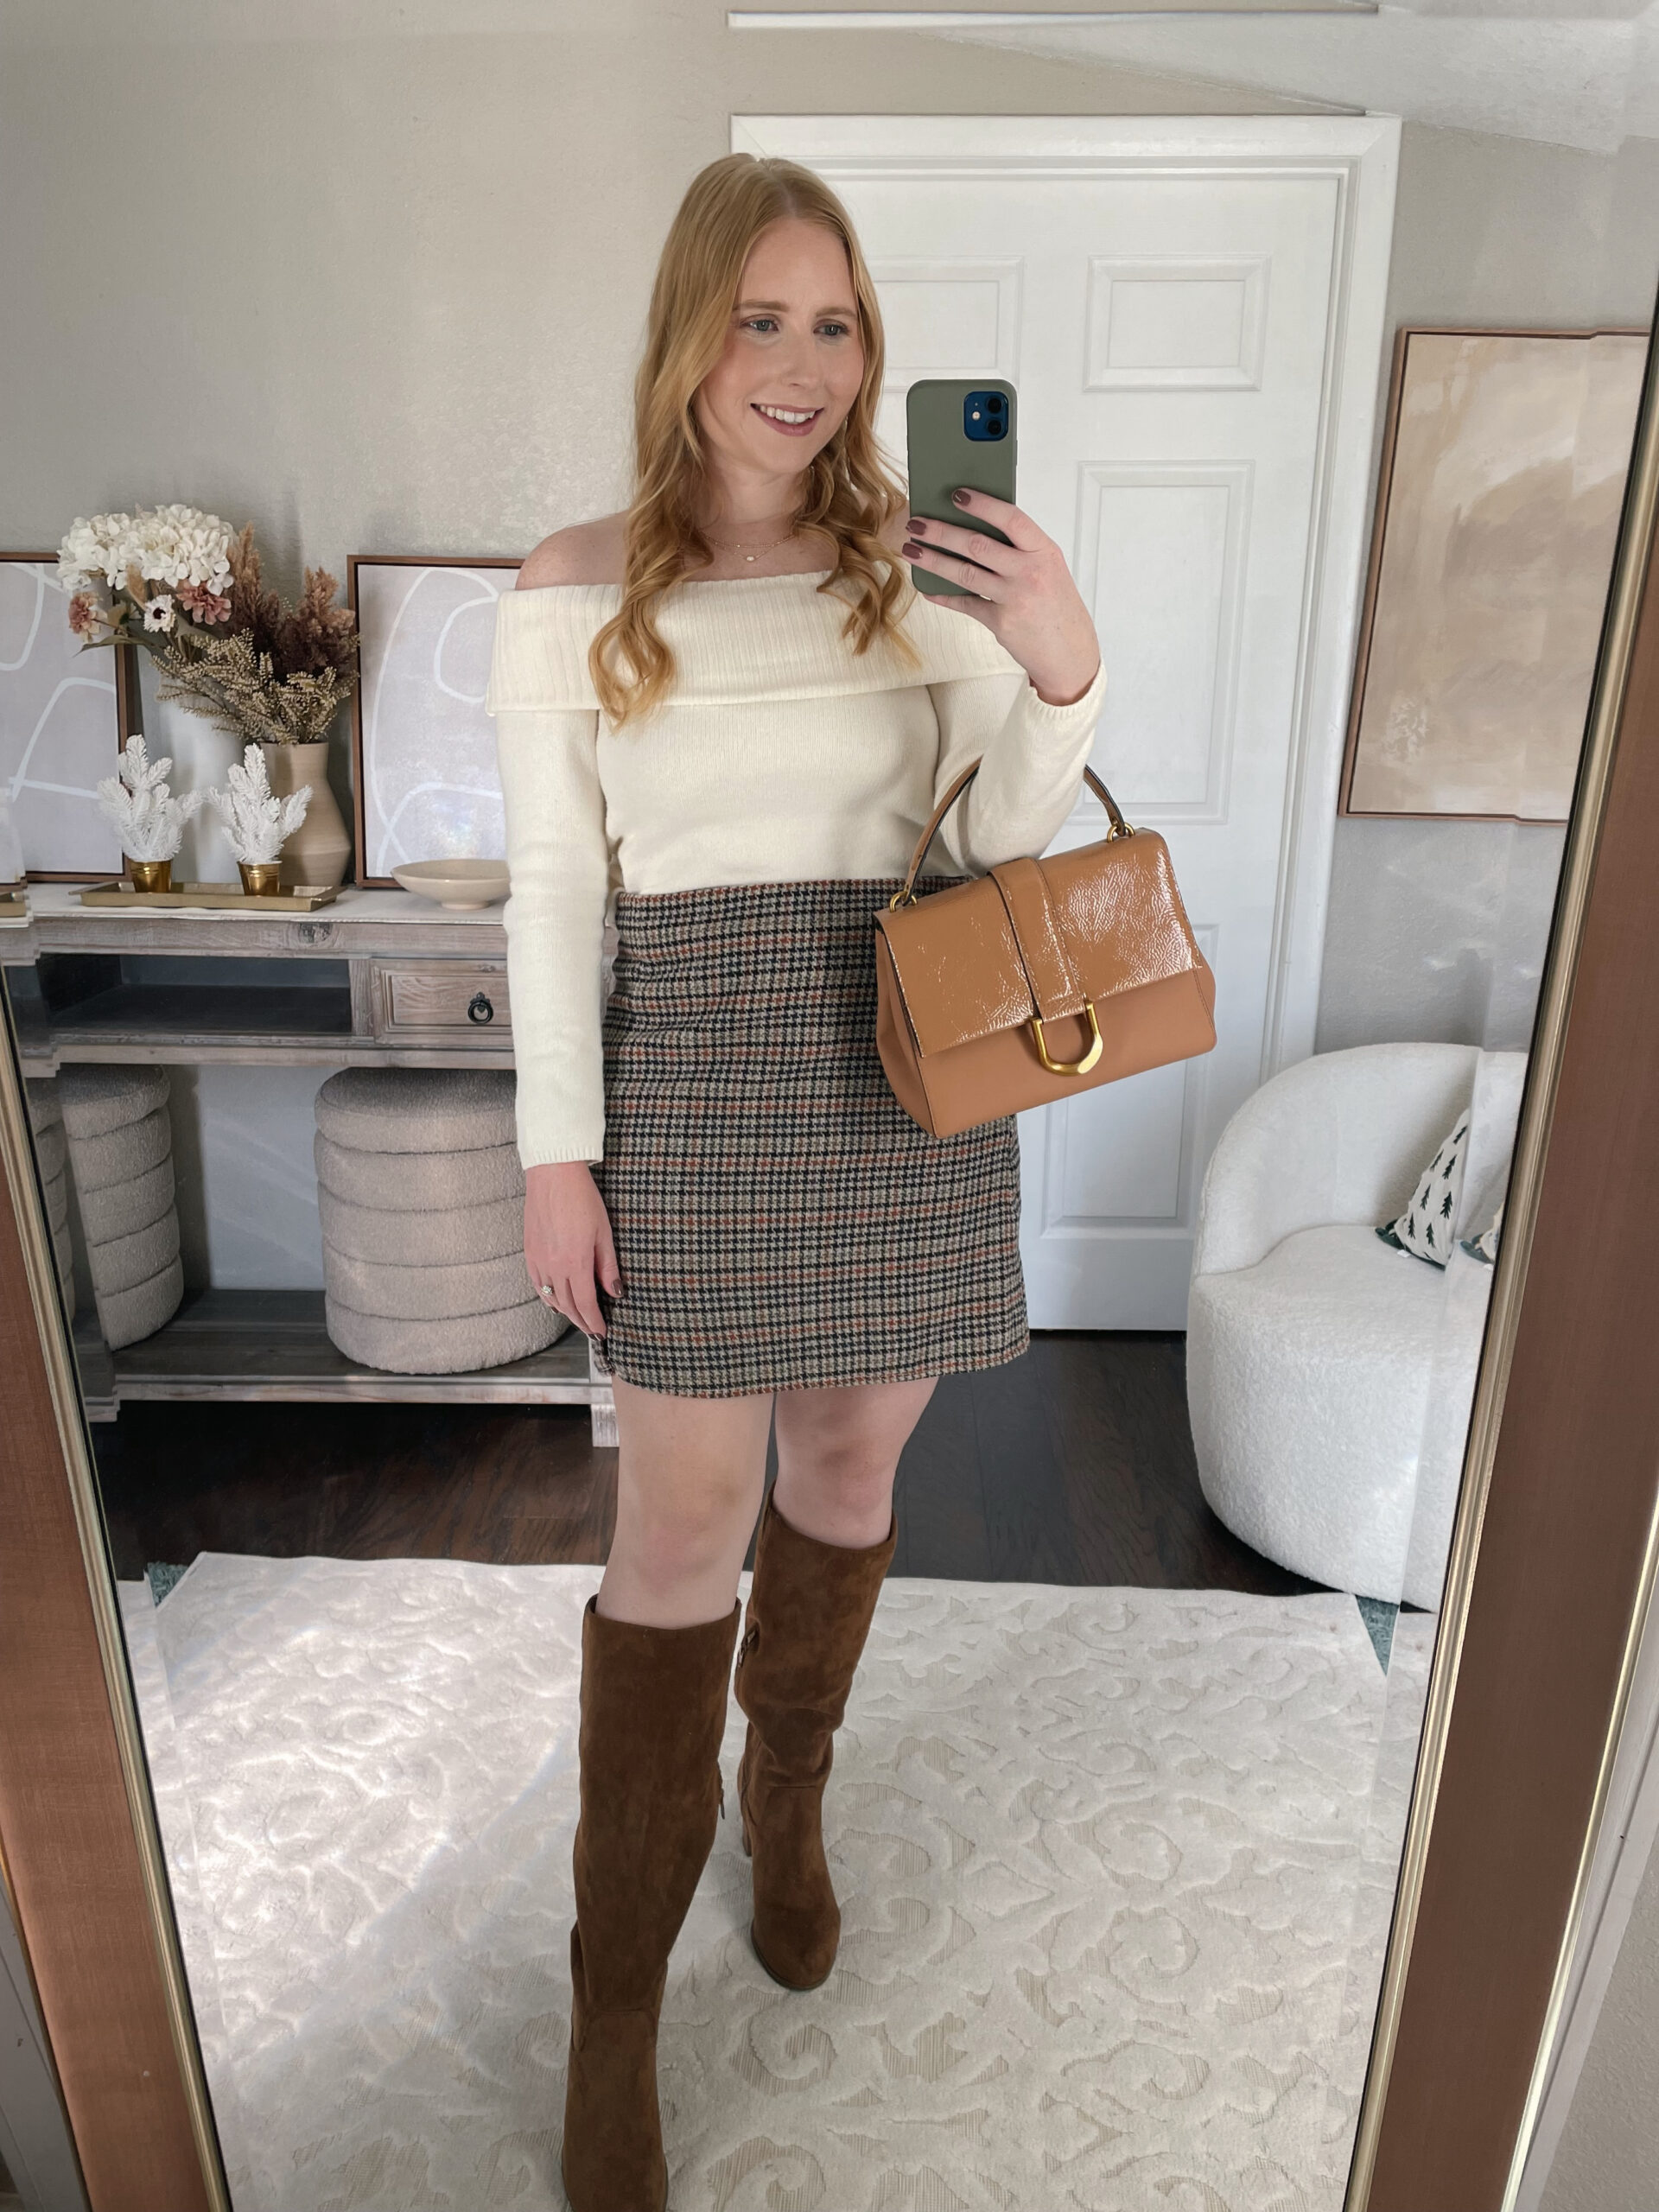 SoSoft Off-the-Shoulder Sweater for Women with Plaid Mini Skirt | 10 Thanksgiving Outfit Ideas 2023 - Affordable Thanksgiving Outfit Ideas -10 Cute Thanksgiving Outfits to Wear in 2023